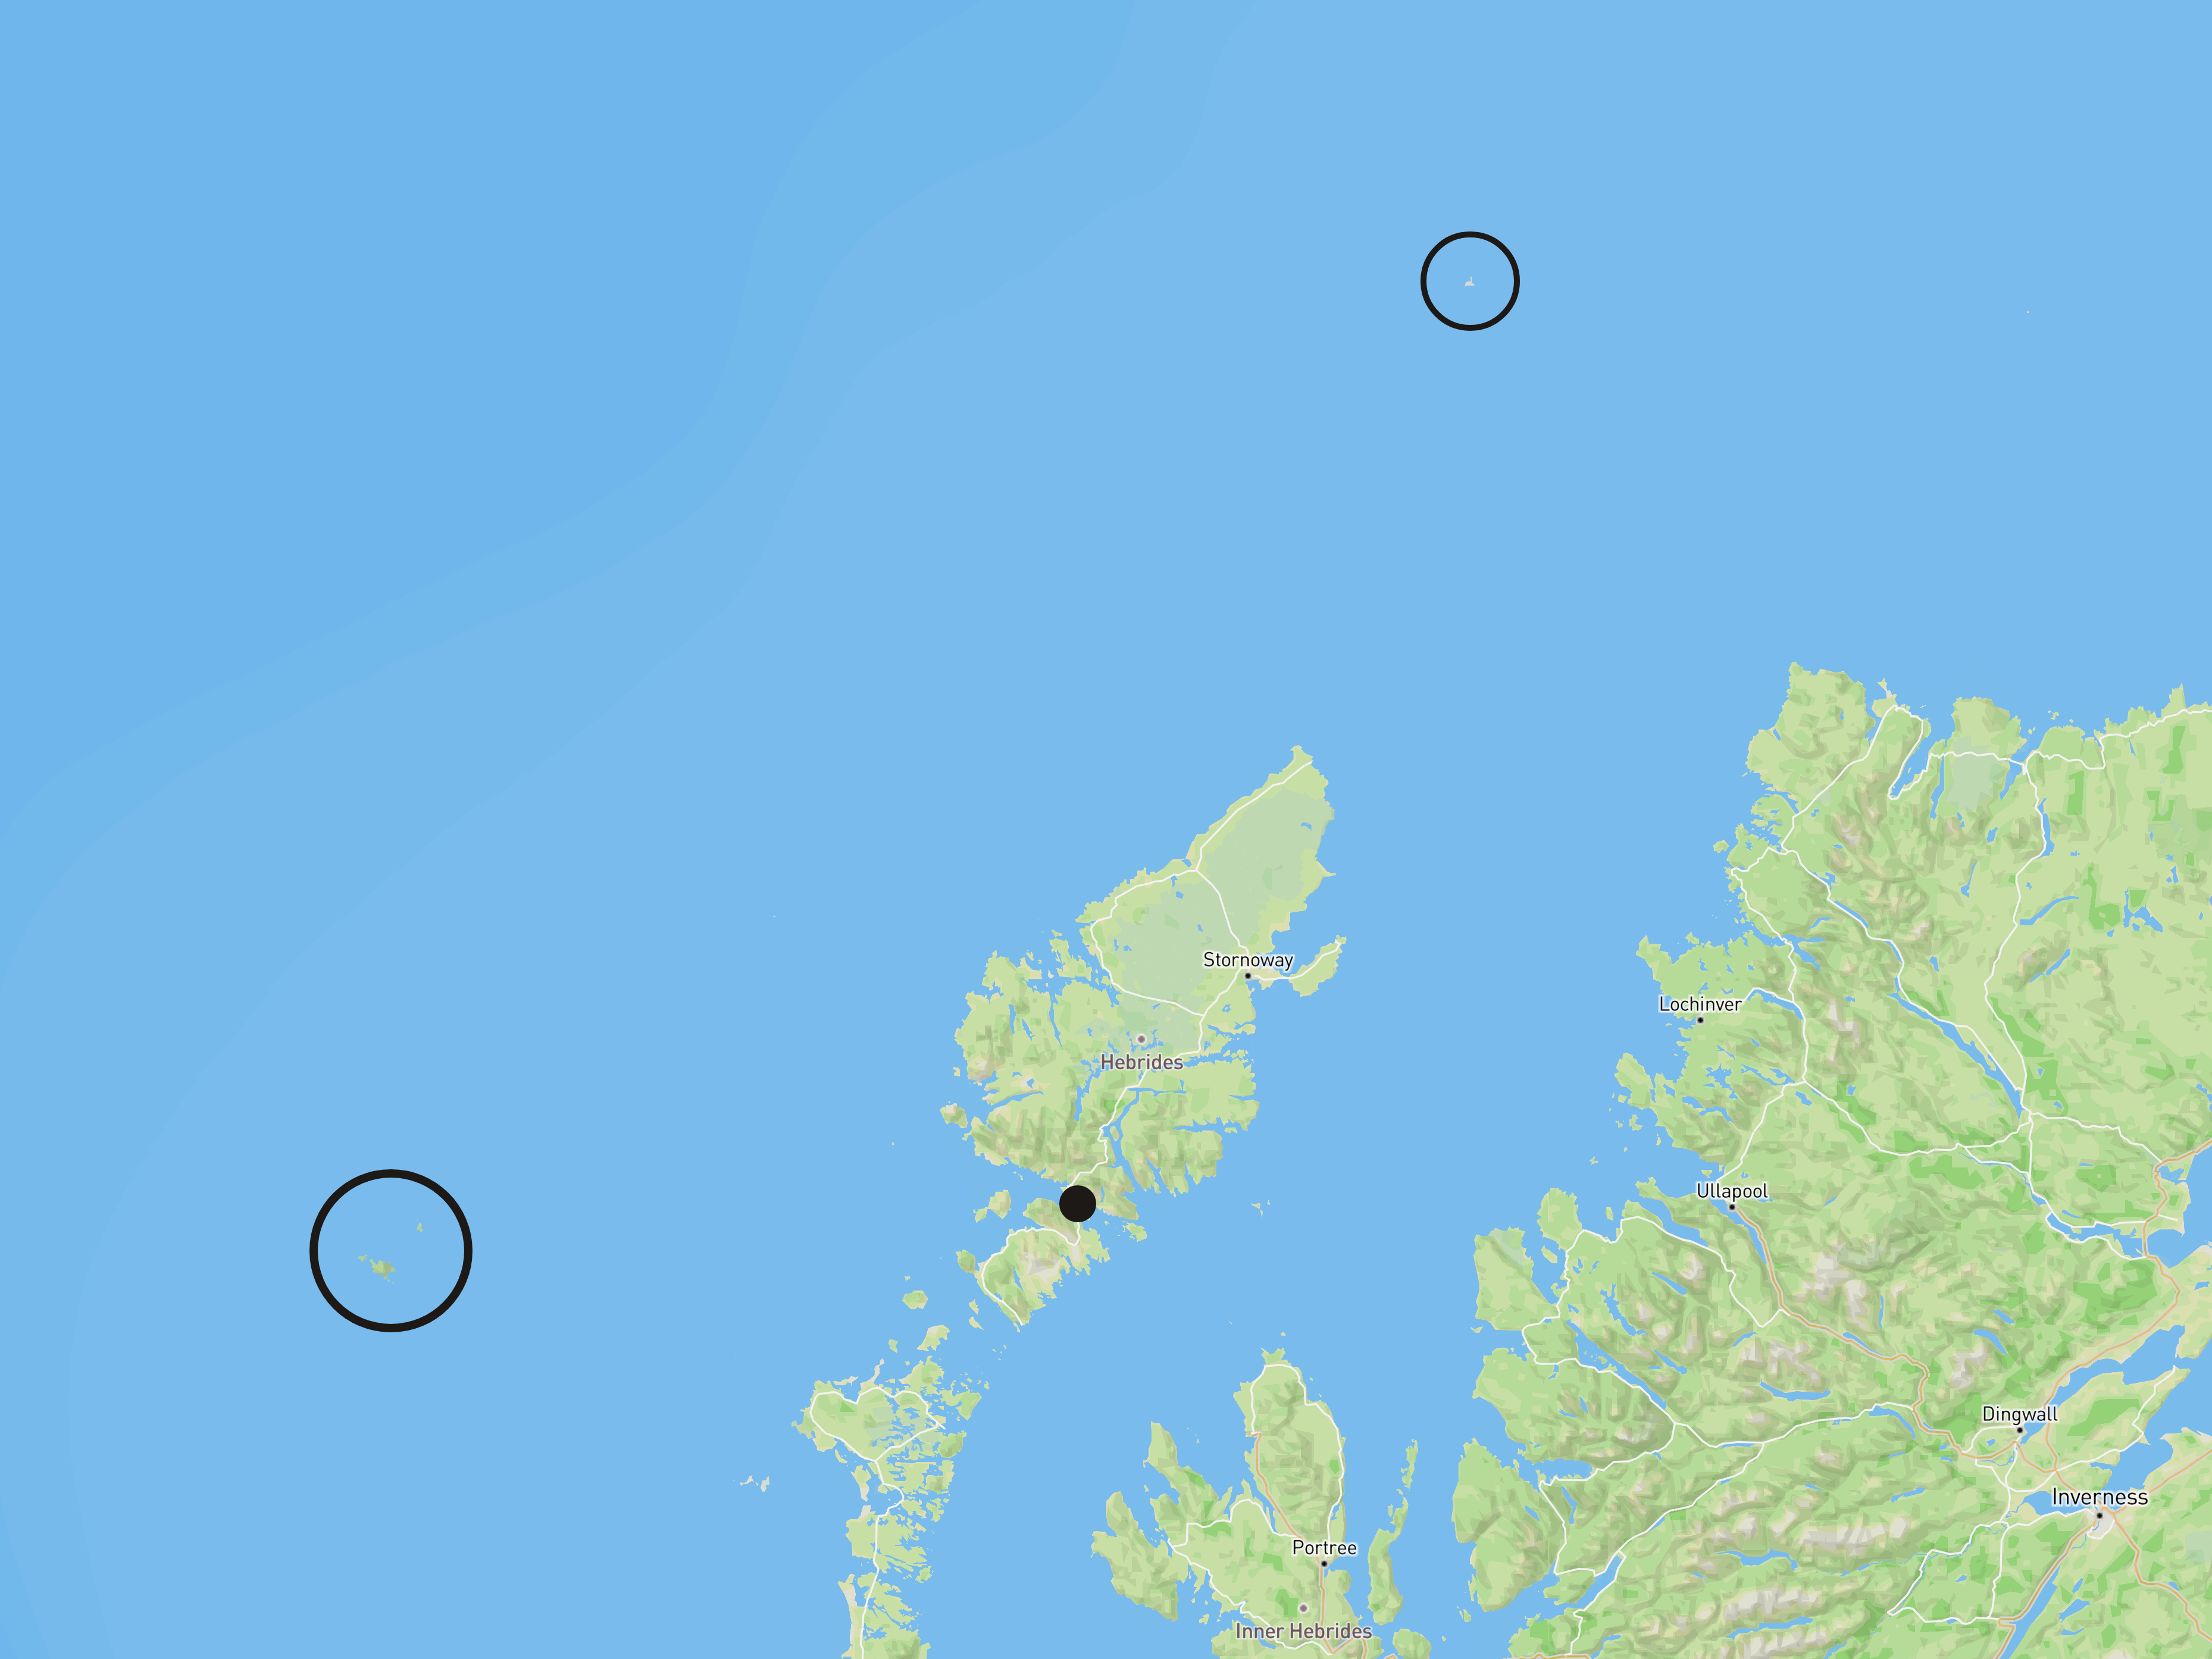 A digital map showing the relationship between the islands in MacLeod's journey. Harris is highlighted with a black dot, St. Kilda to the west is highlighted with a black ring, and Rona to the far north has a smaller black ring.